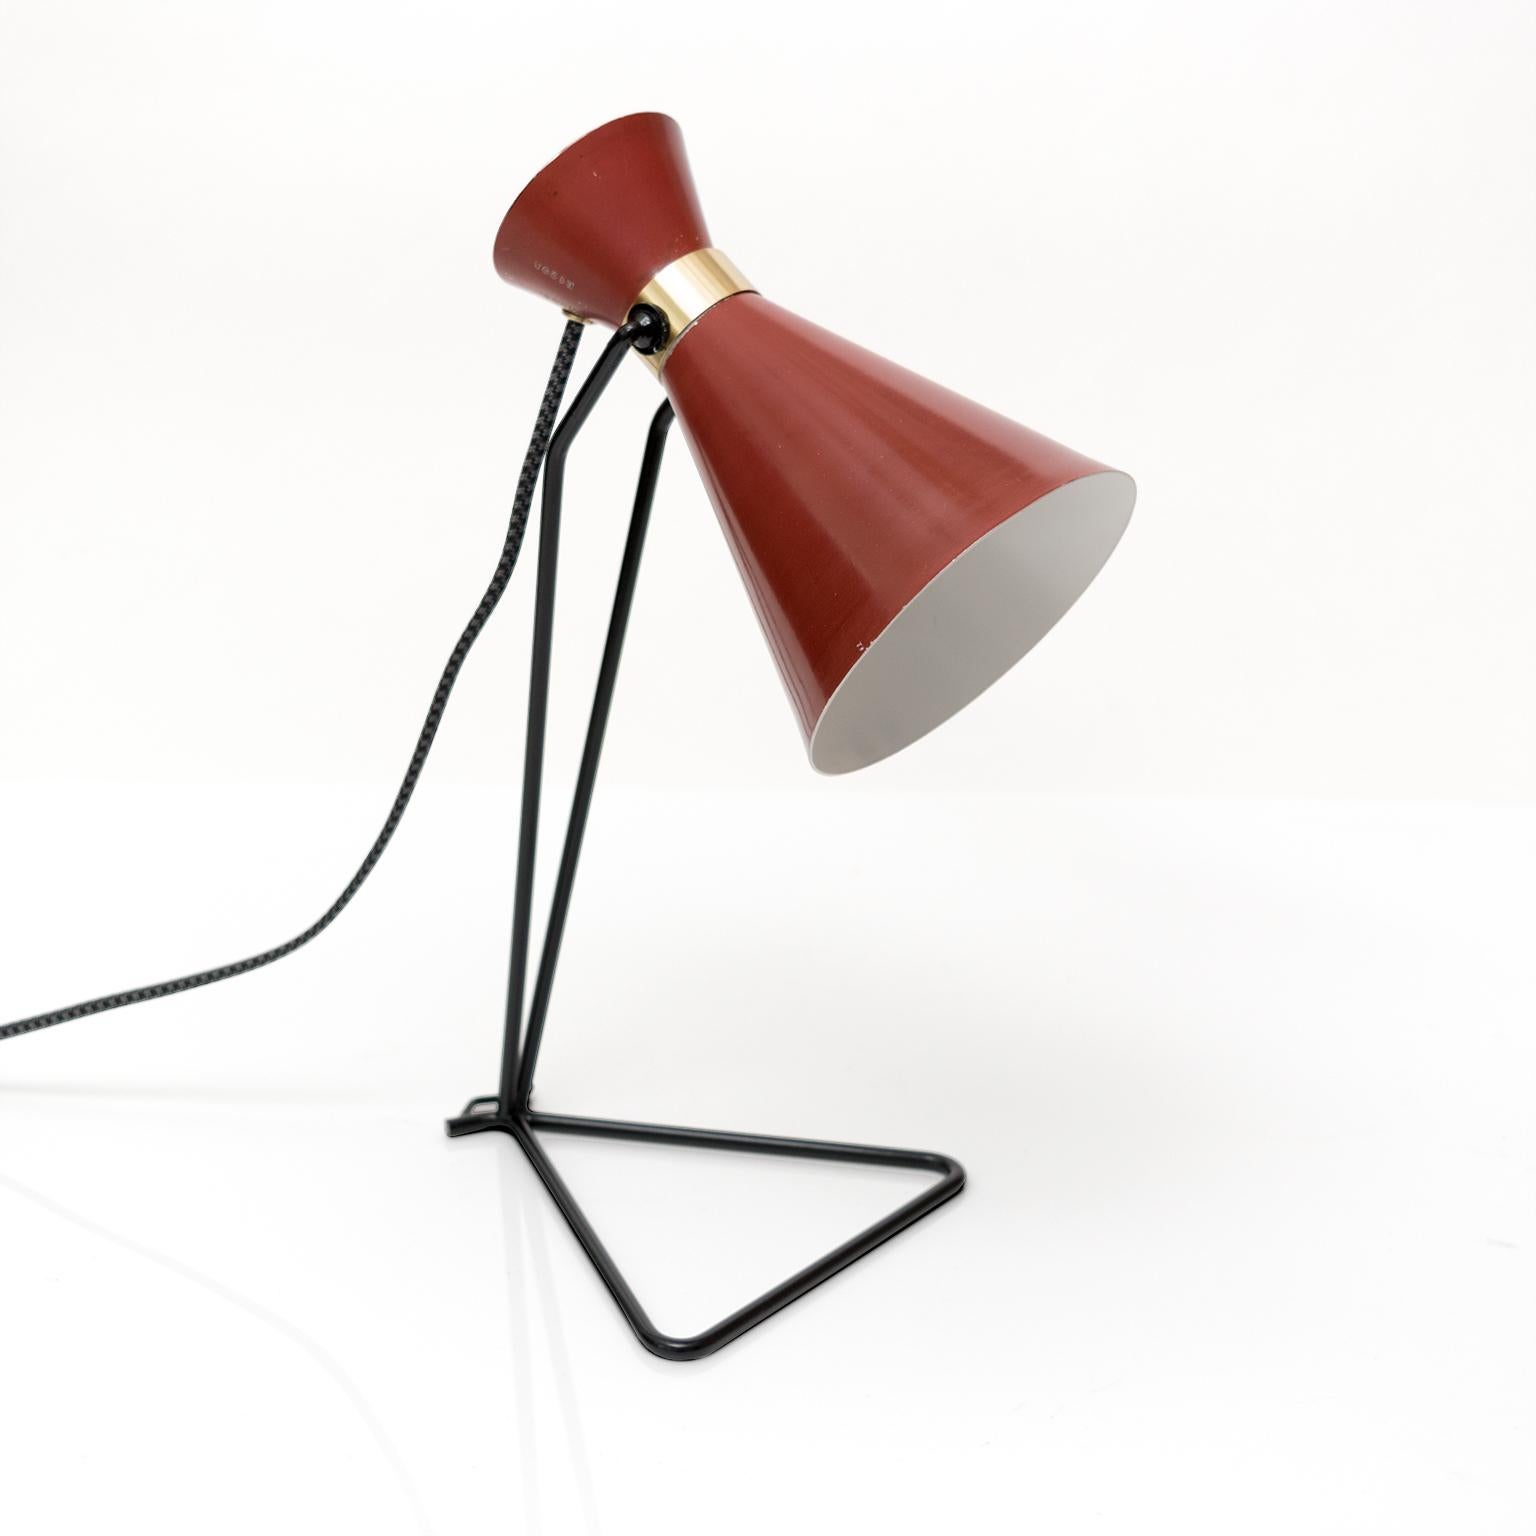 A Scandinavian Modern desk lamp by Sven Aage Holm Sorensen for the lighting company Asea. The lamp retains ifs original red paint on its adjustable shade. Newly electrified with one candelabra base socket.

Measures: depth 9